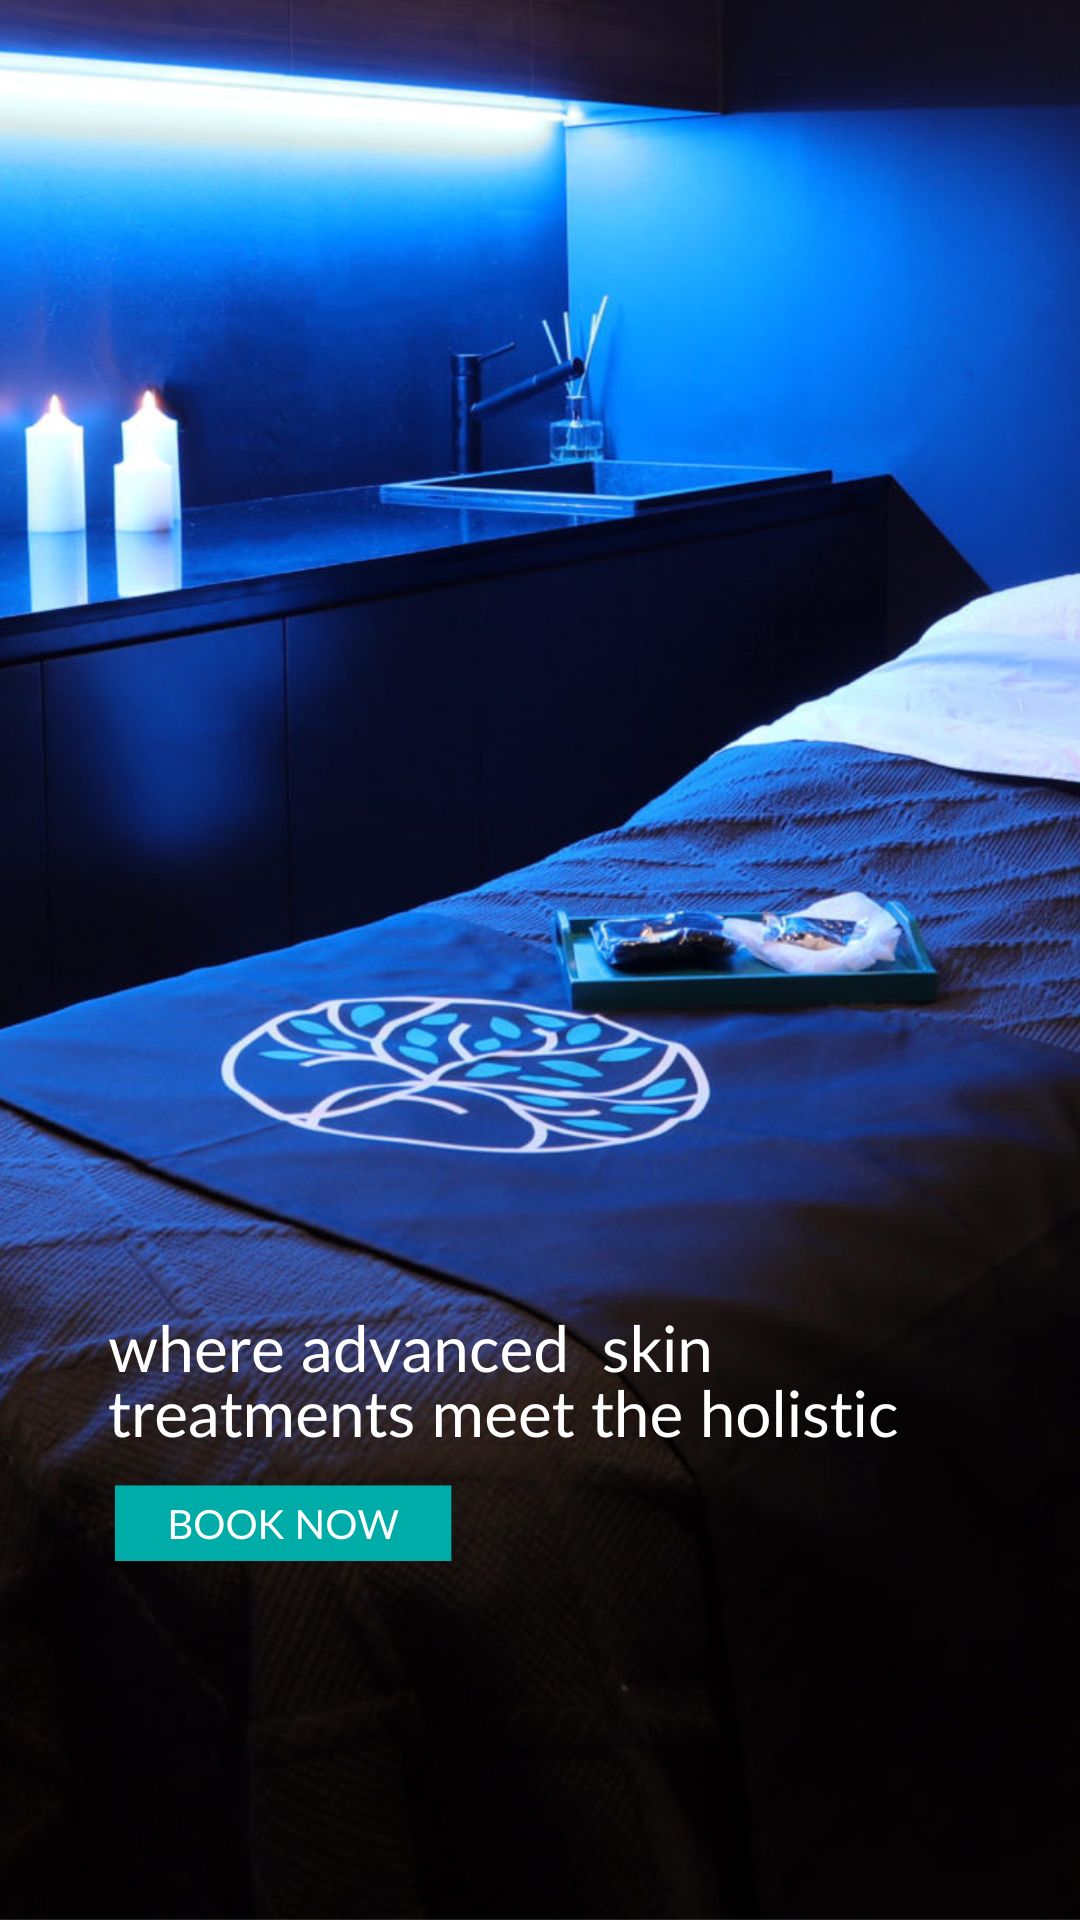 the Temple Skincare & Spa is where advanced skin treatments meet the holistic. (2560 × 600 px) (Instagram Story)